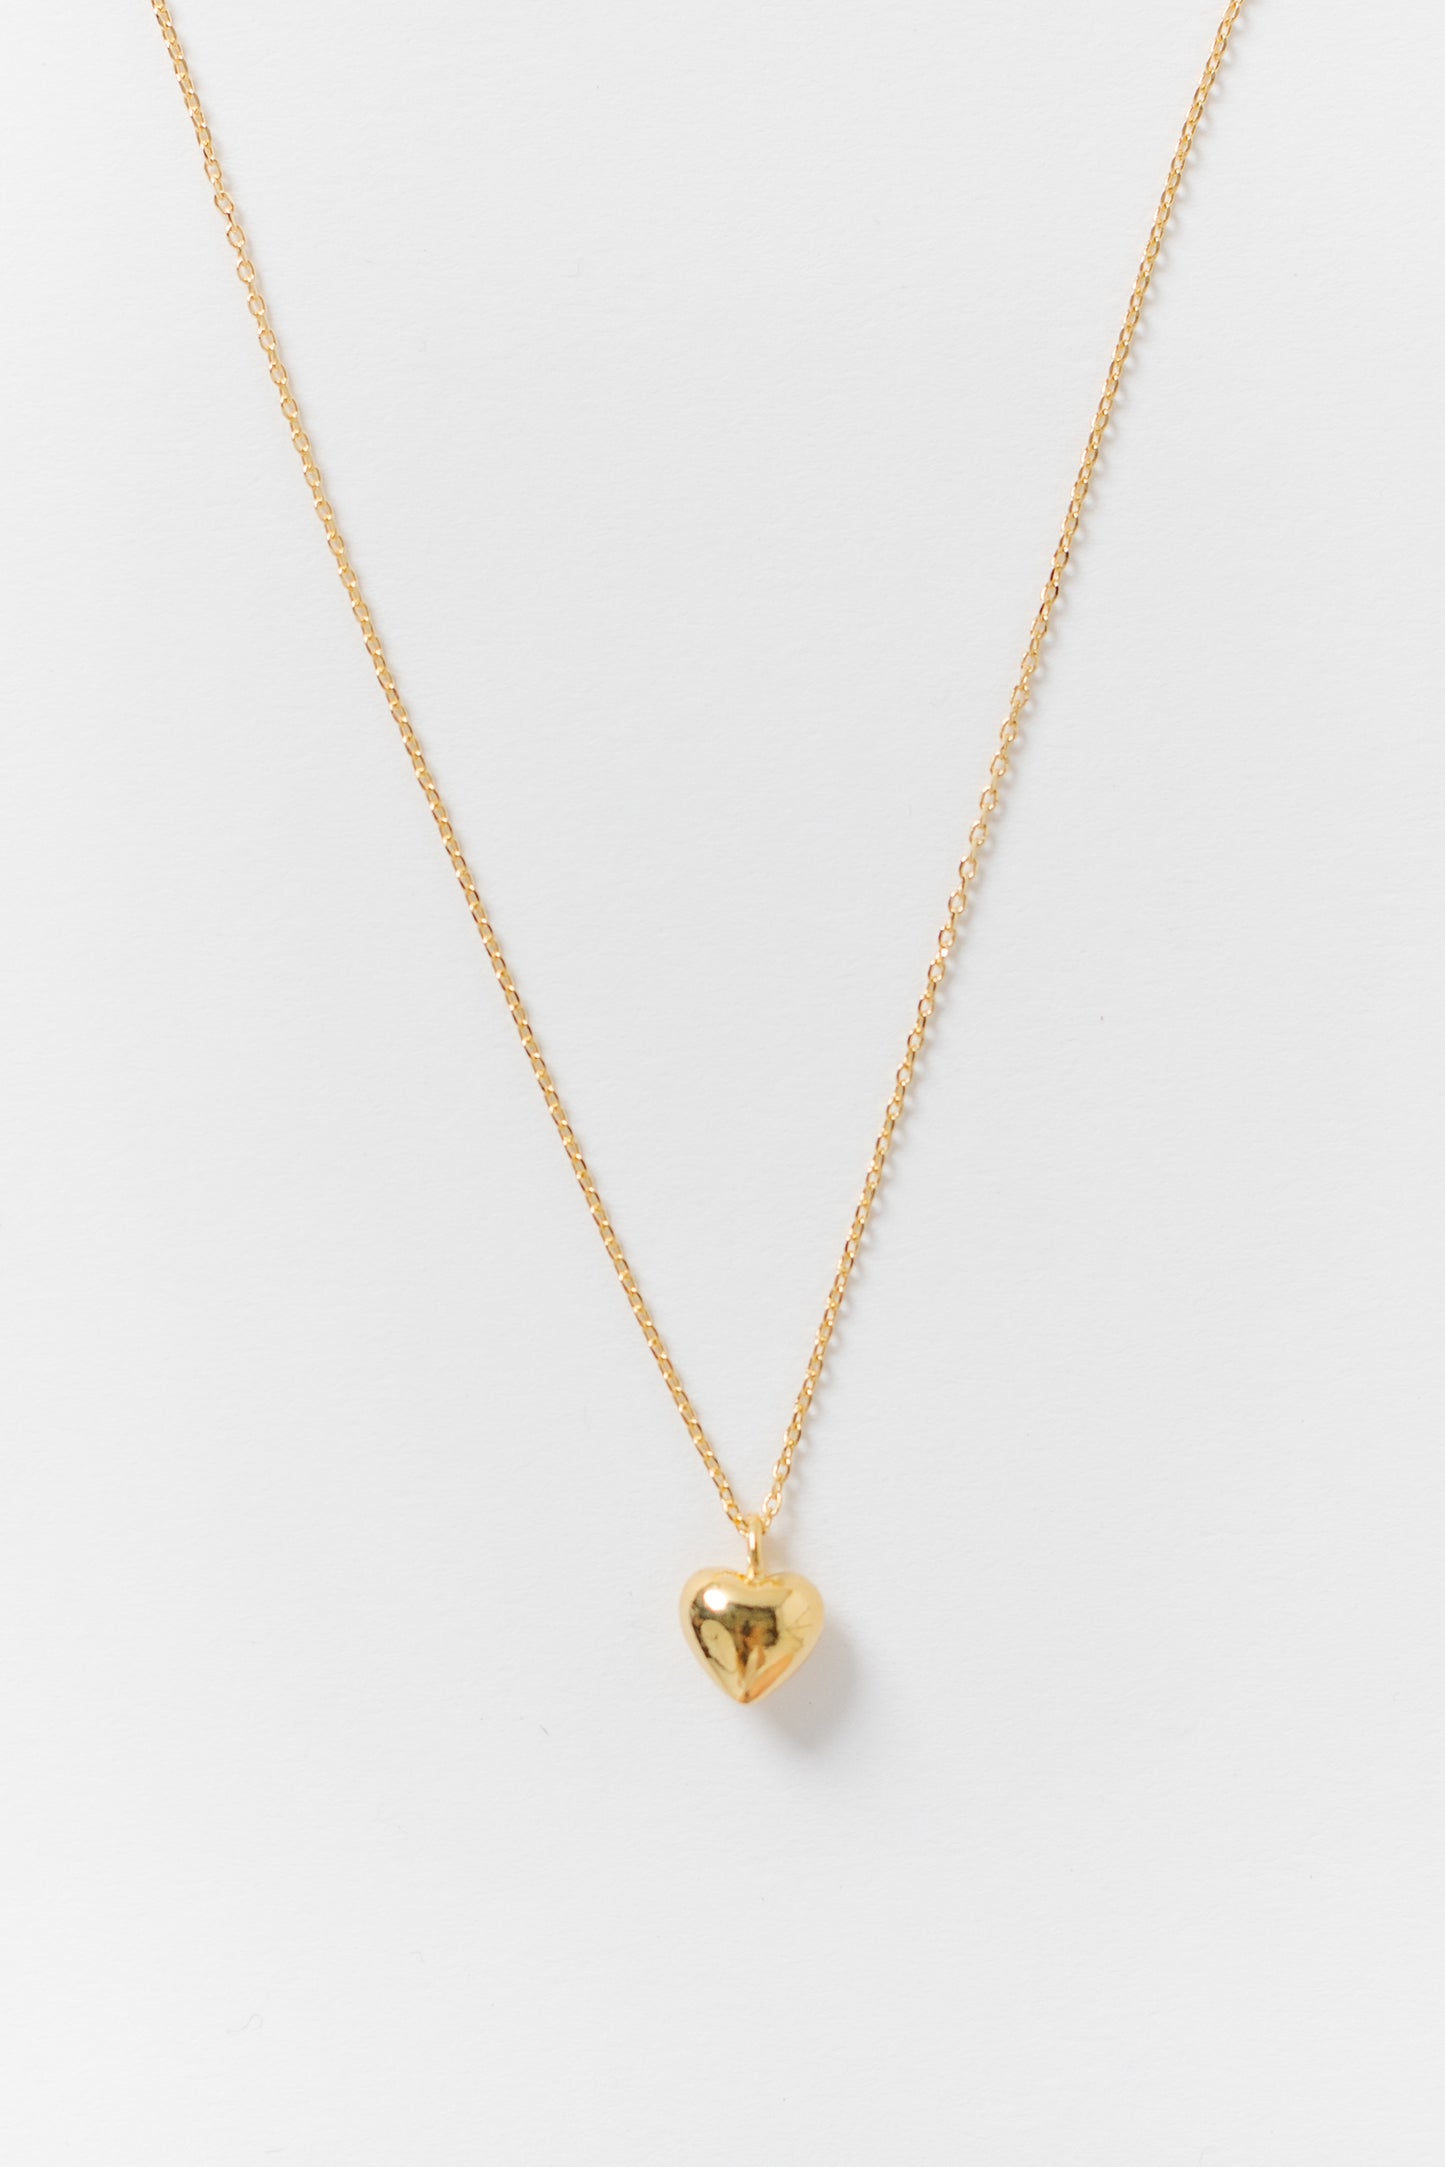 Cove Solid Petite Heart Necklace